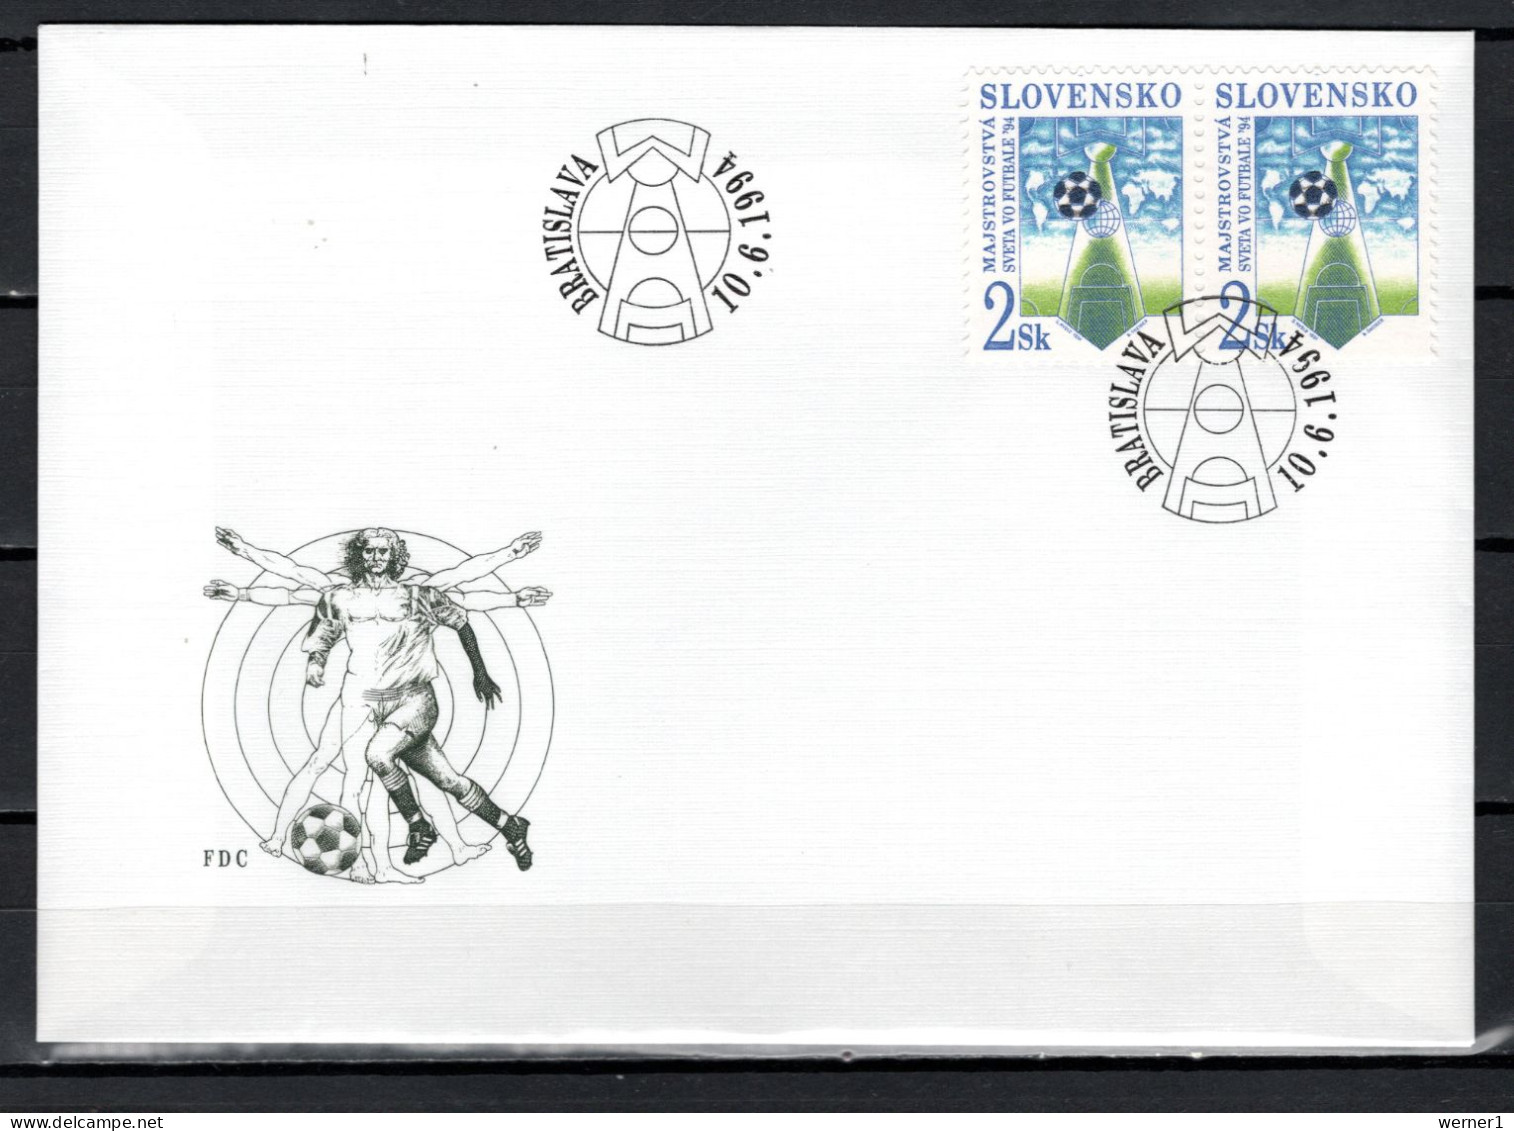 Slovakia 1994 Football Soccer World Cup 2 Stamps On FDC - 1994 – Vereinigte Staaten